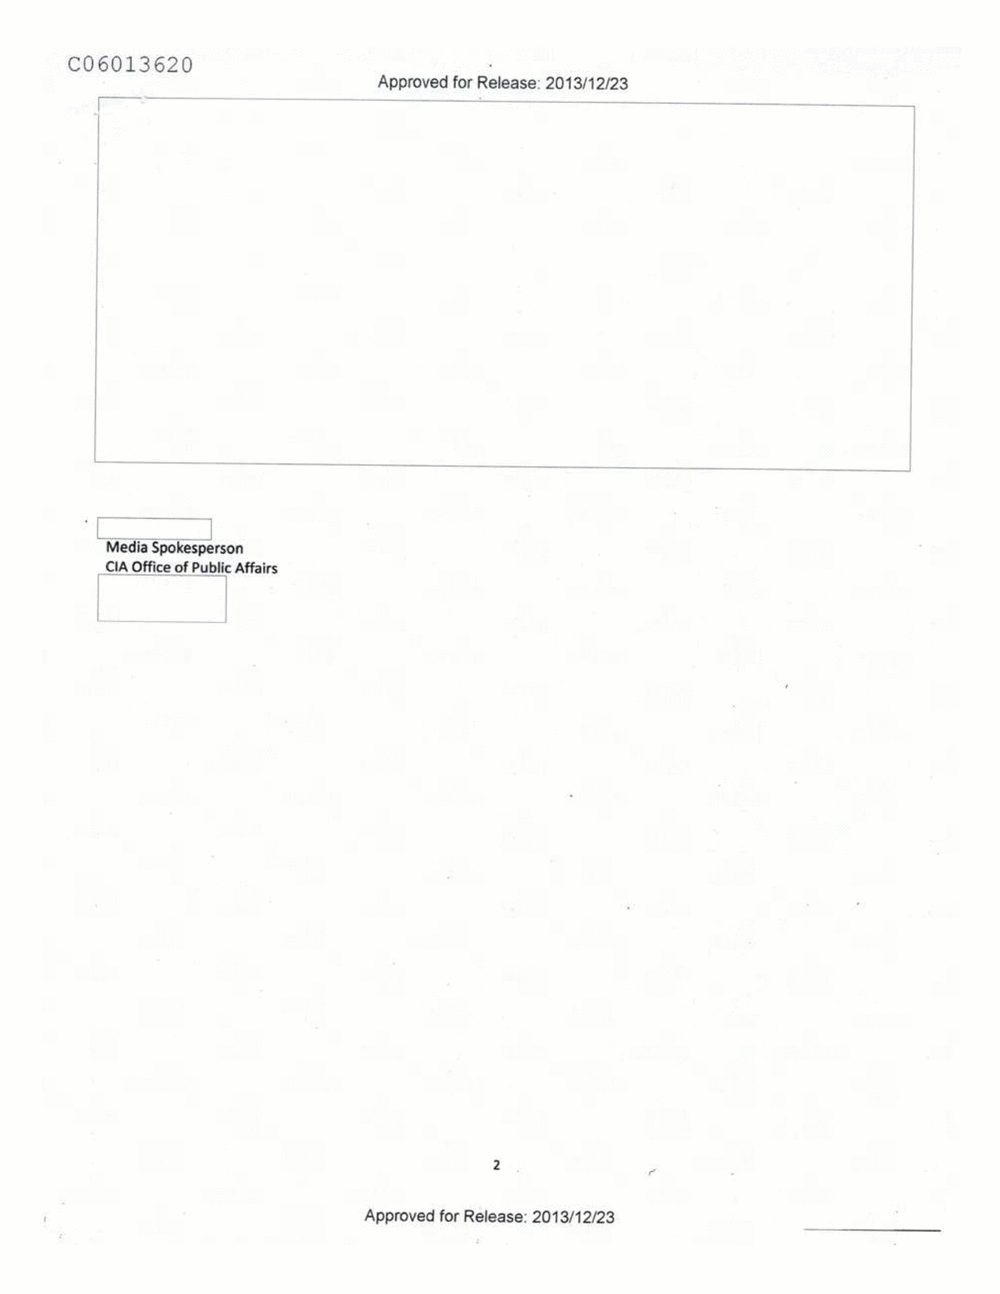 Page 454 from Email Correspondence Between Reporters and CIA Flacks